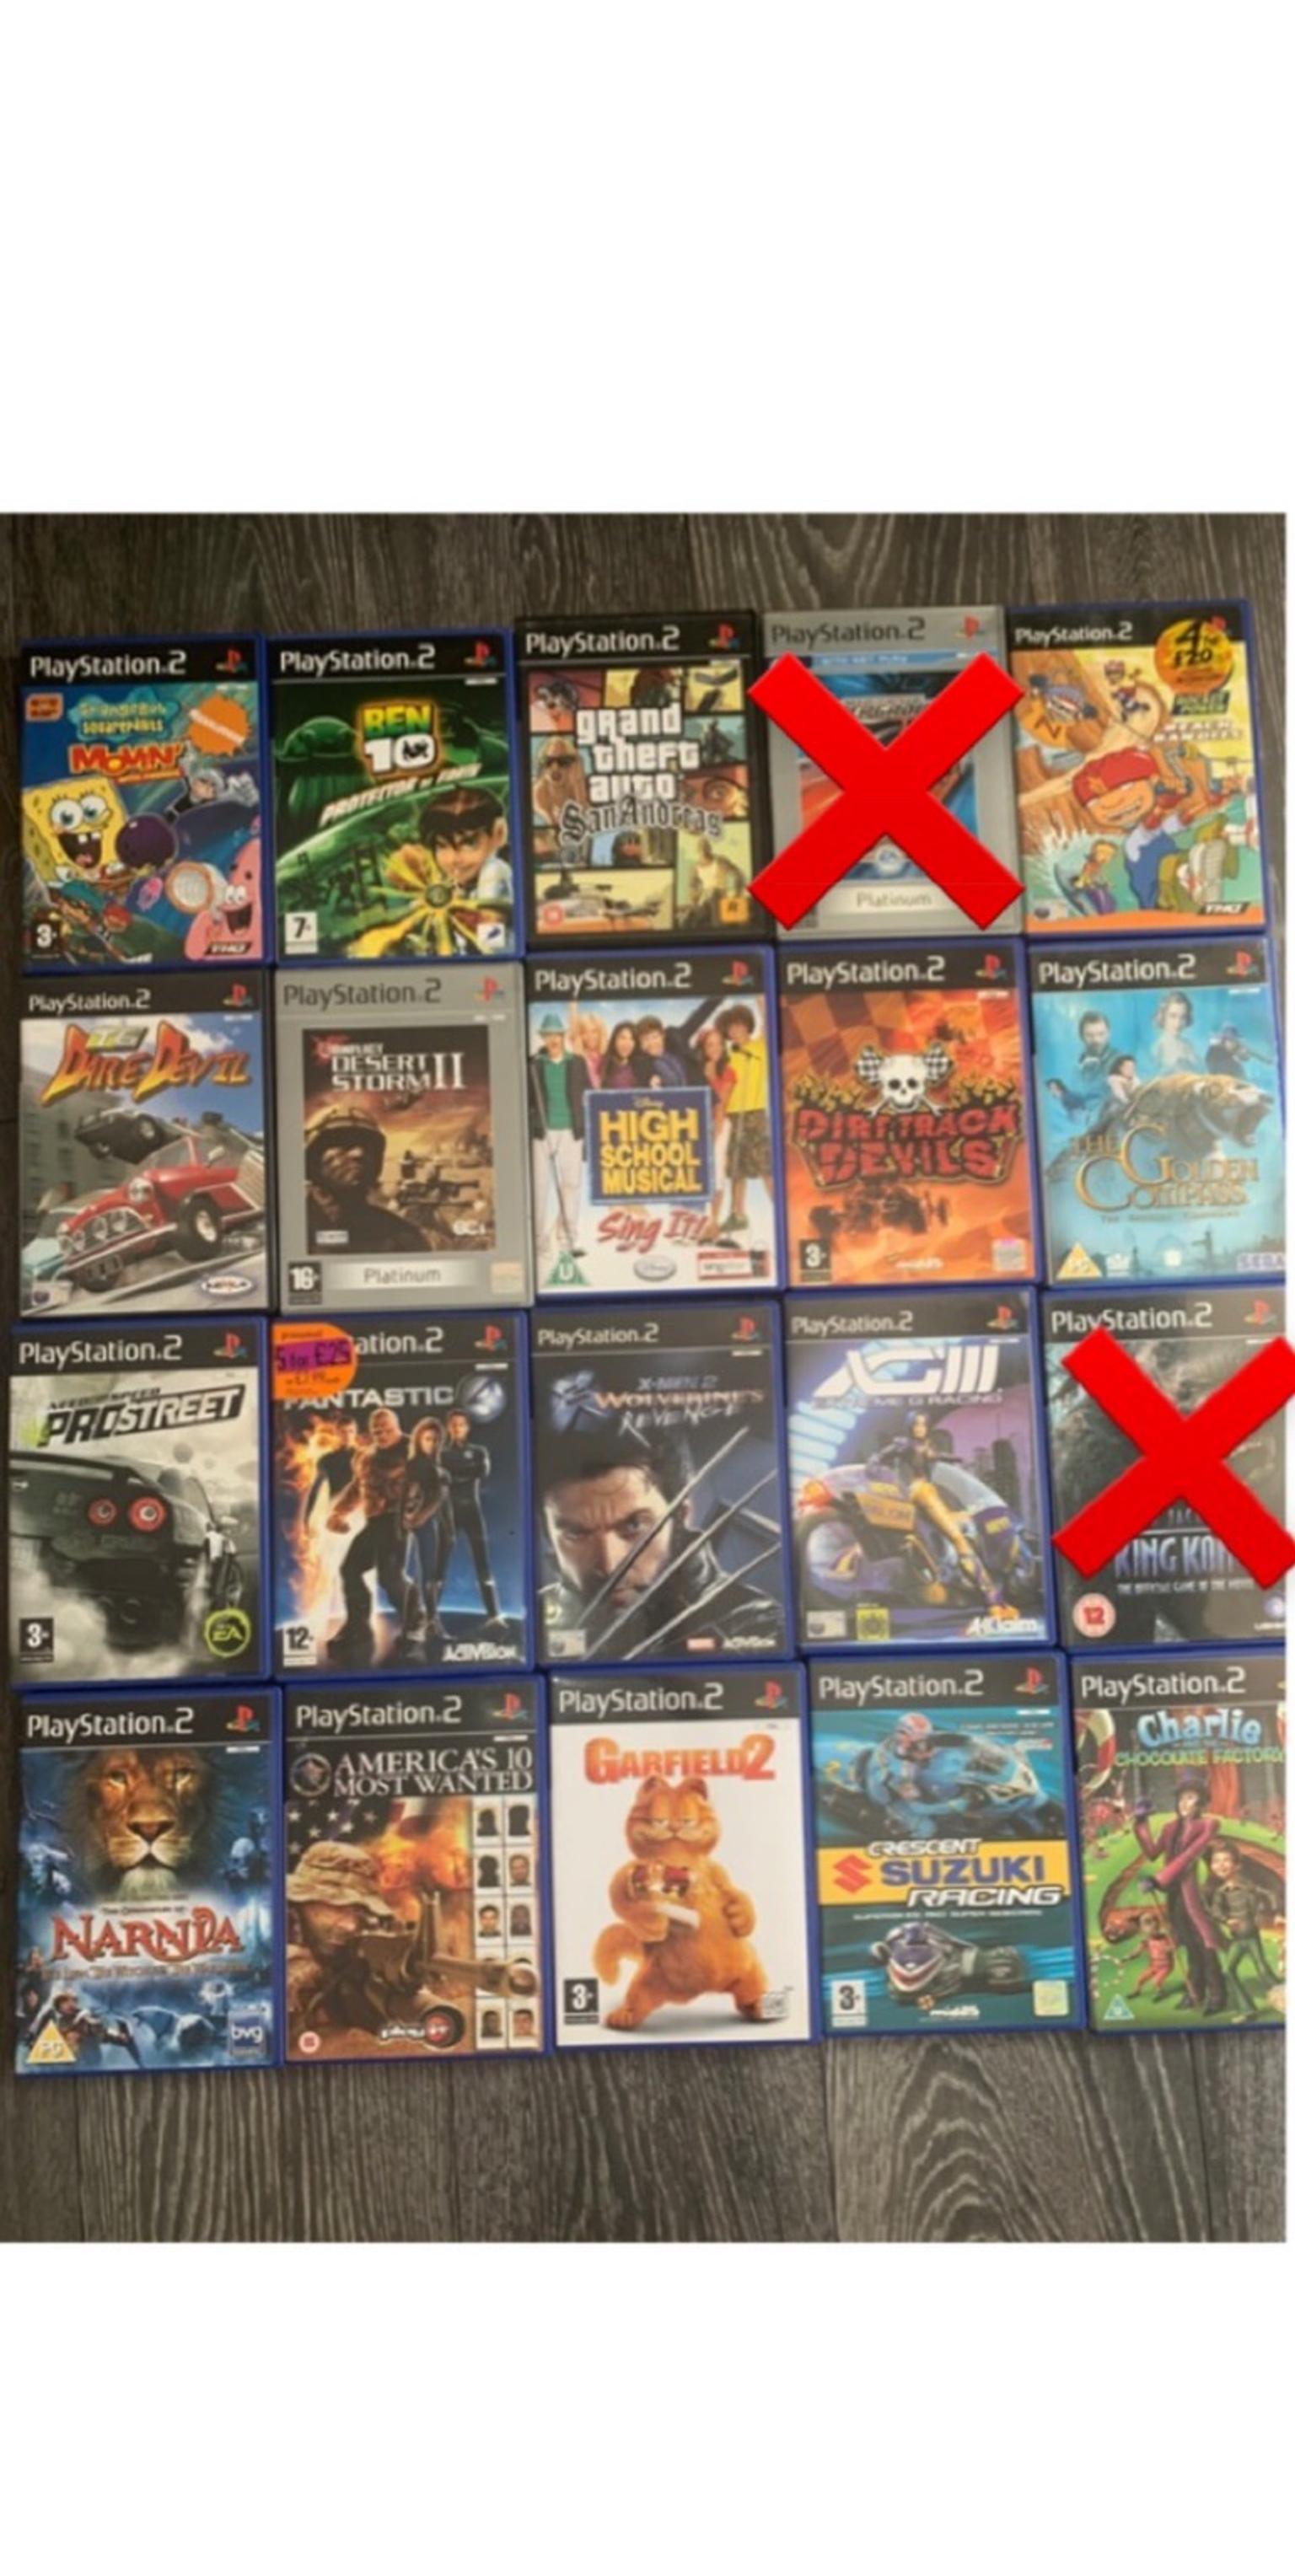 stores that sell ps2 games near me